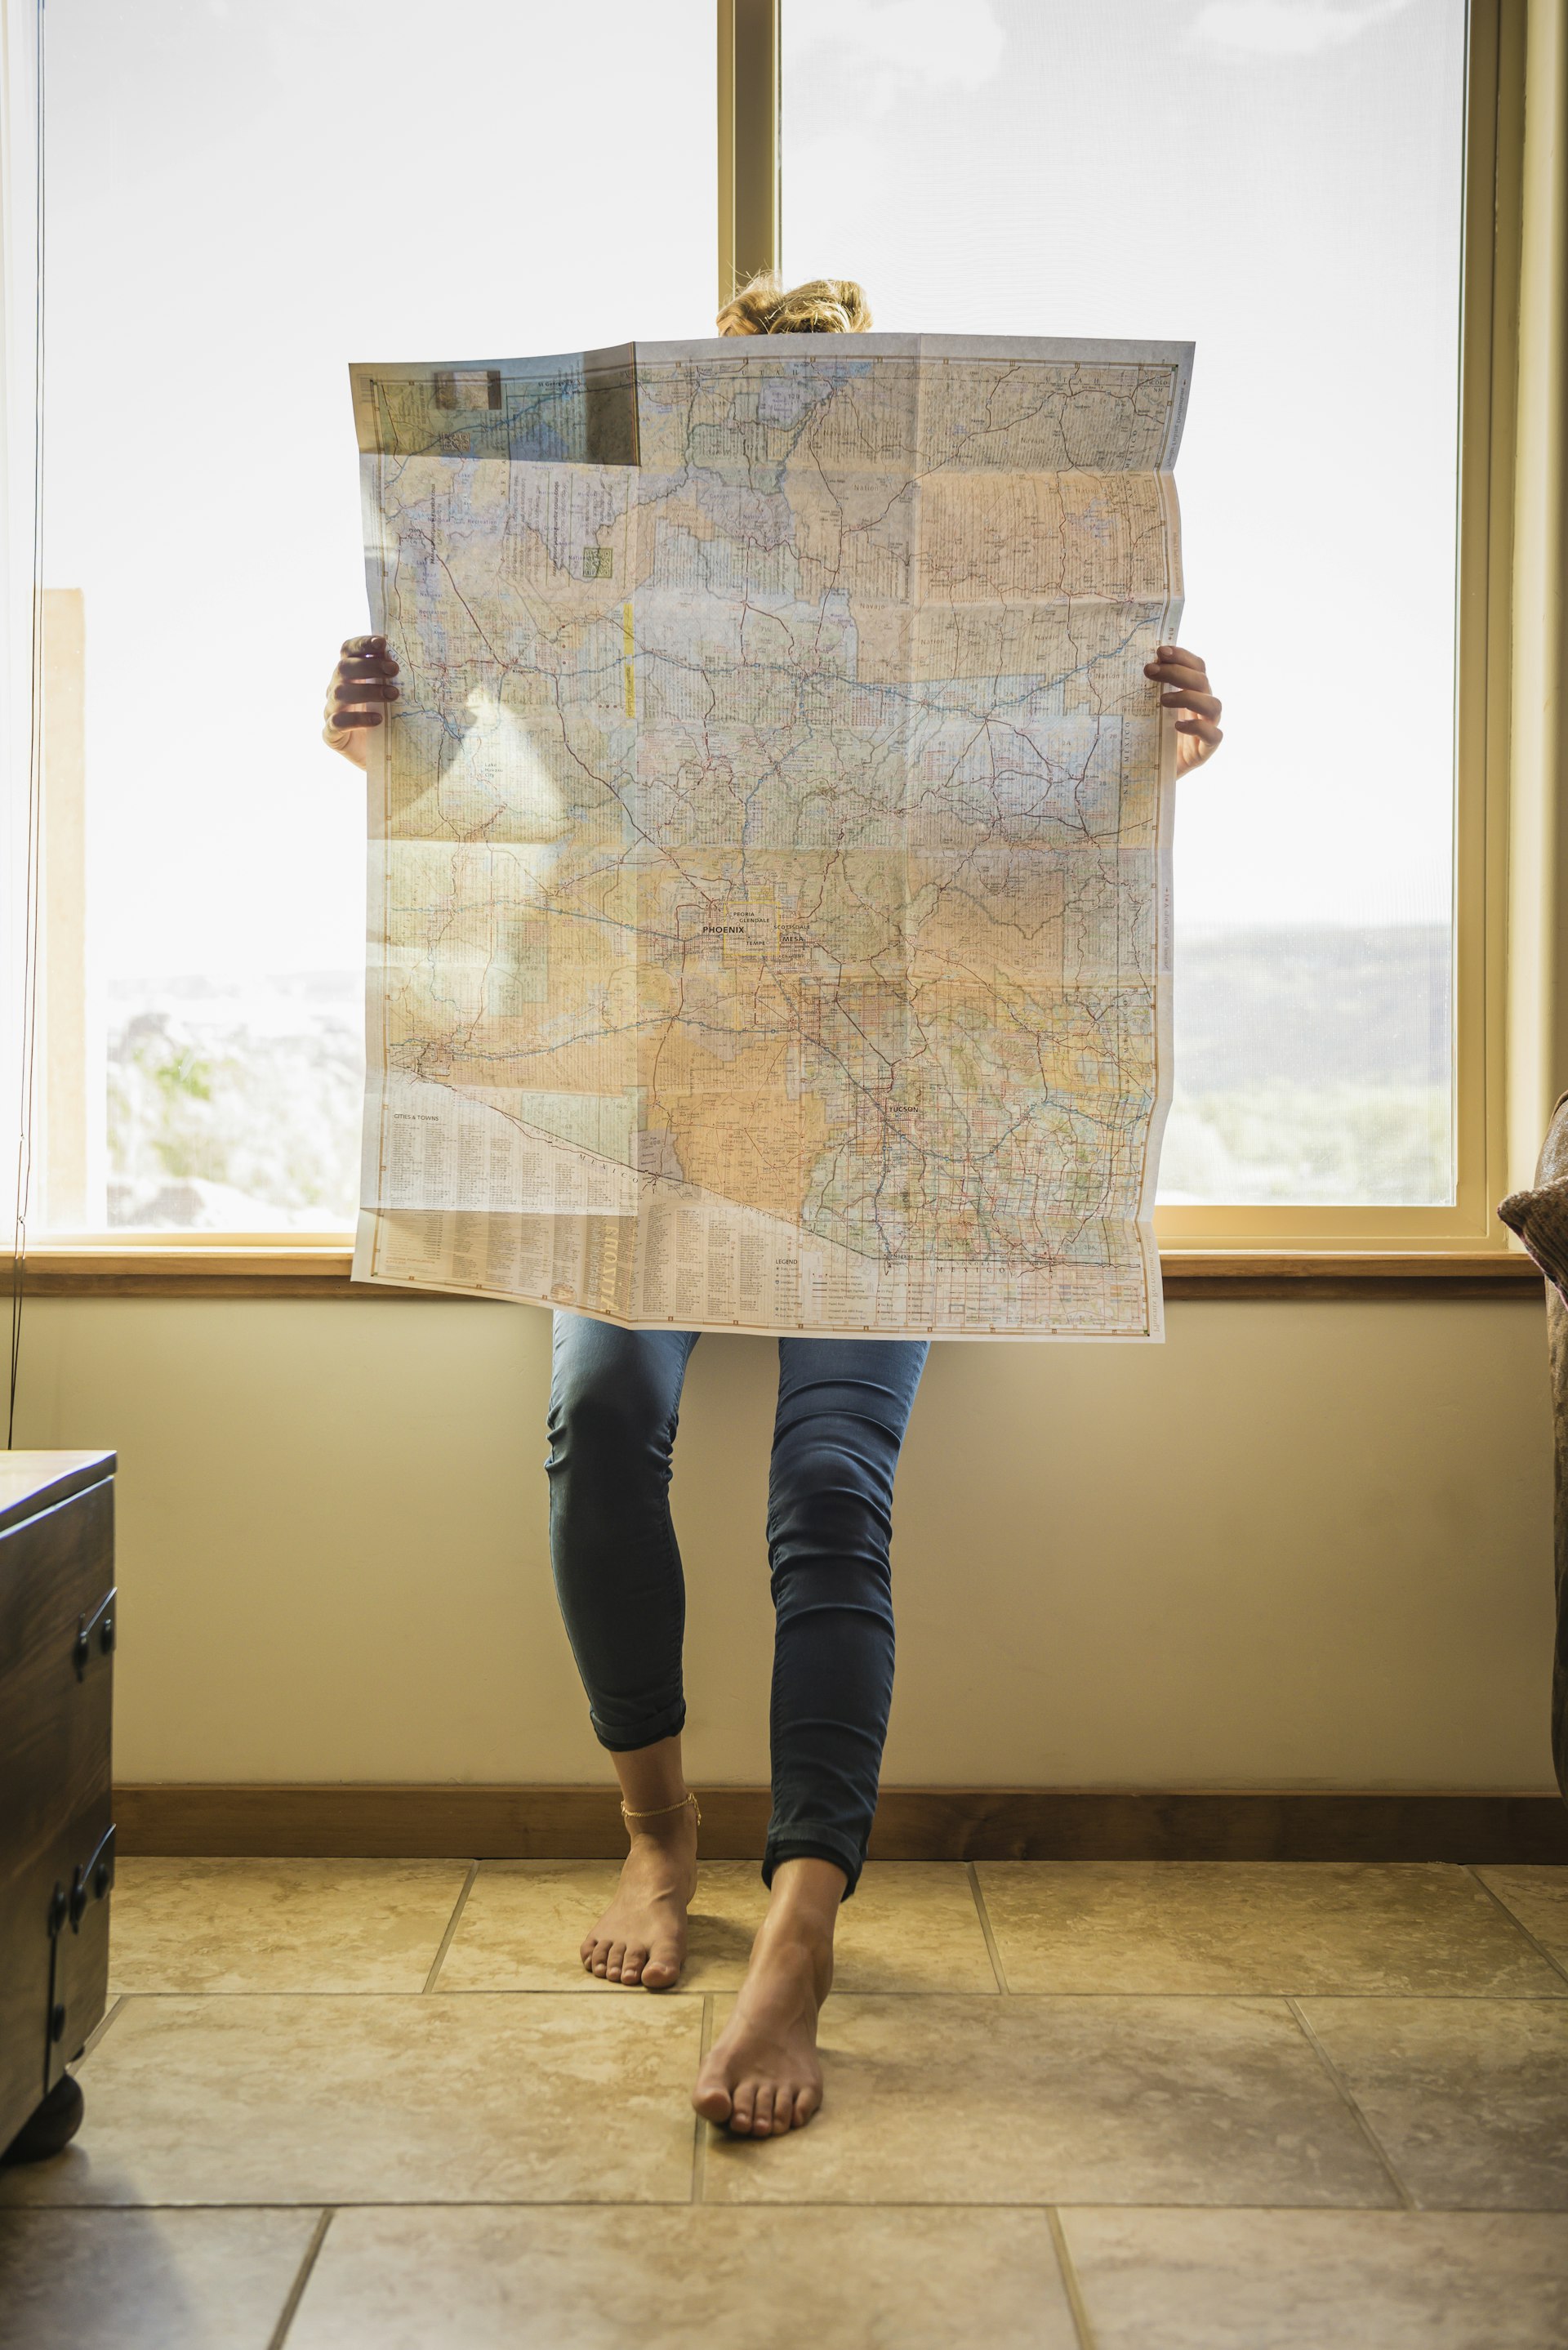 A woman reading a large map